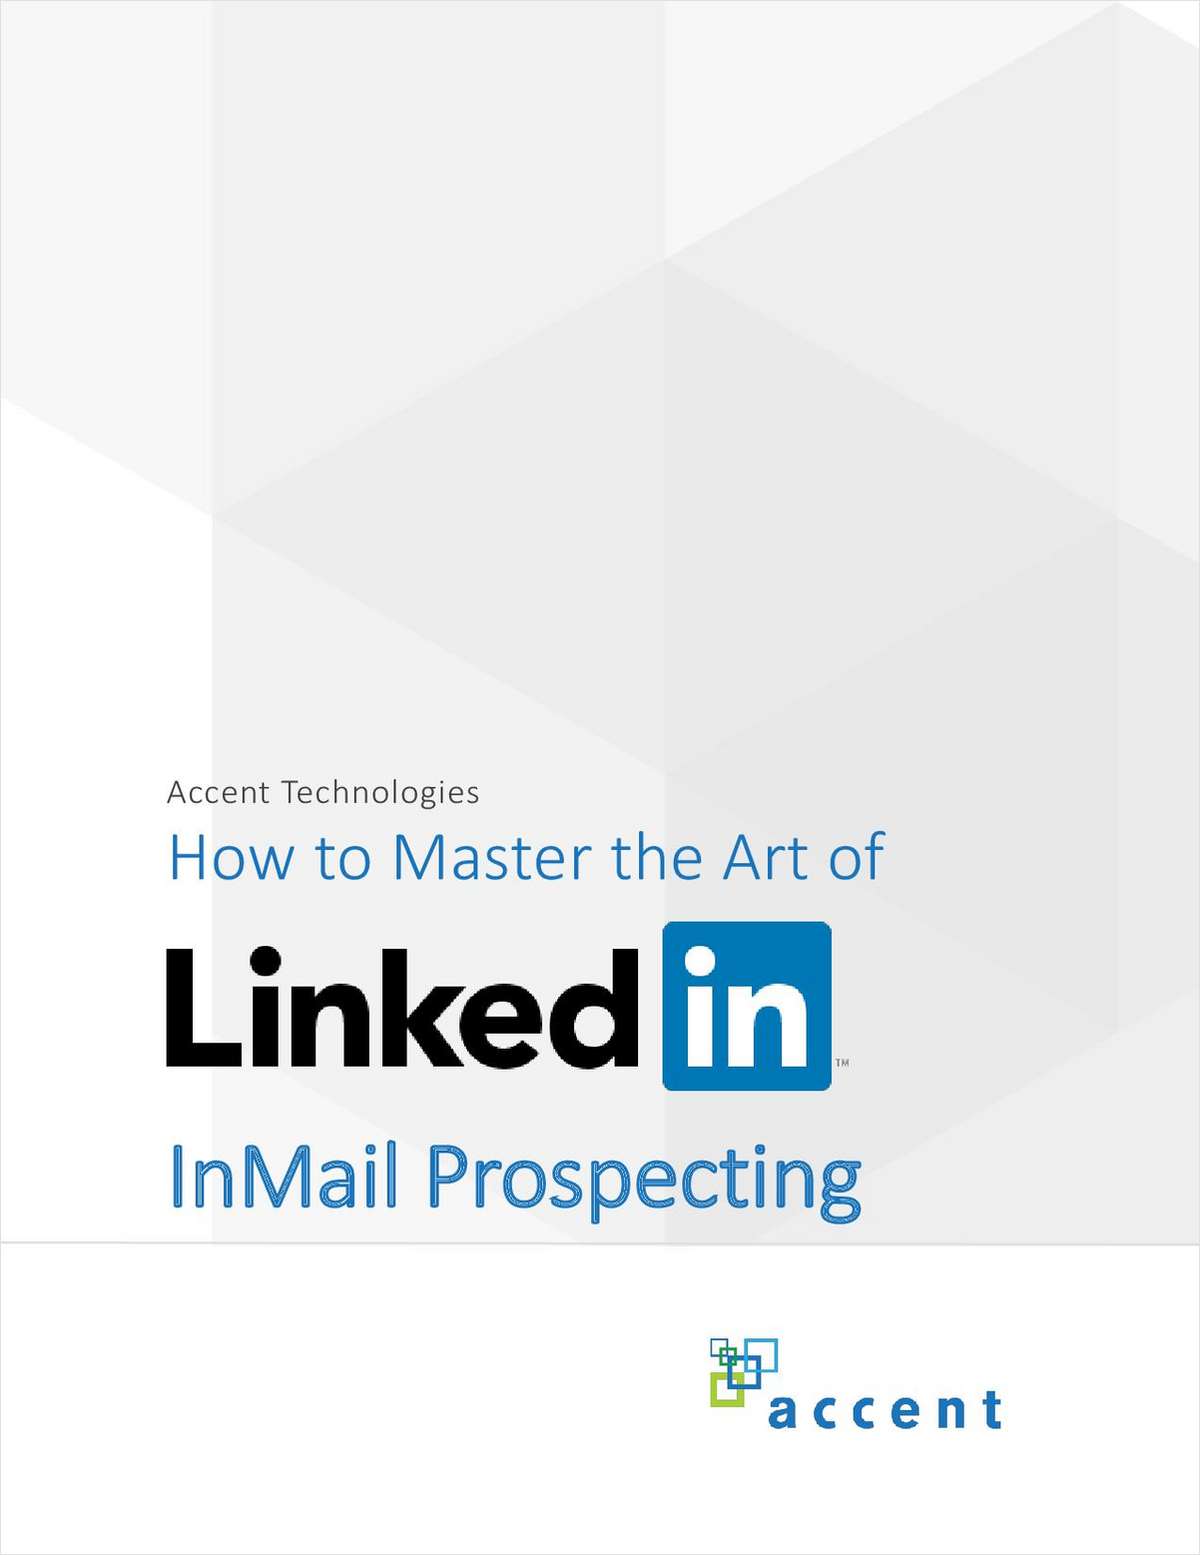 How to Master the Art of LinkedIn InMail Prospecting